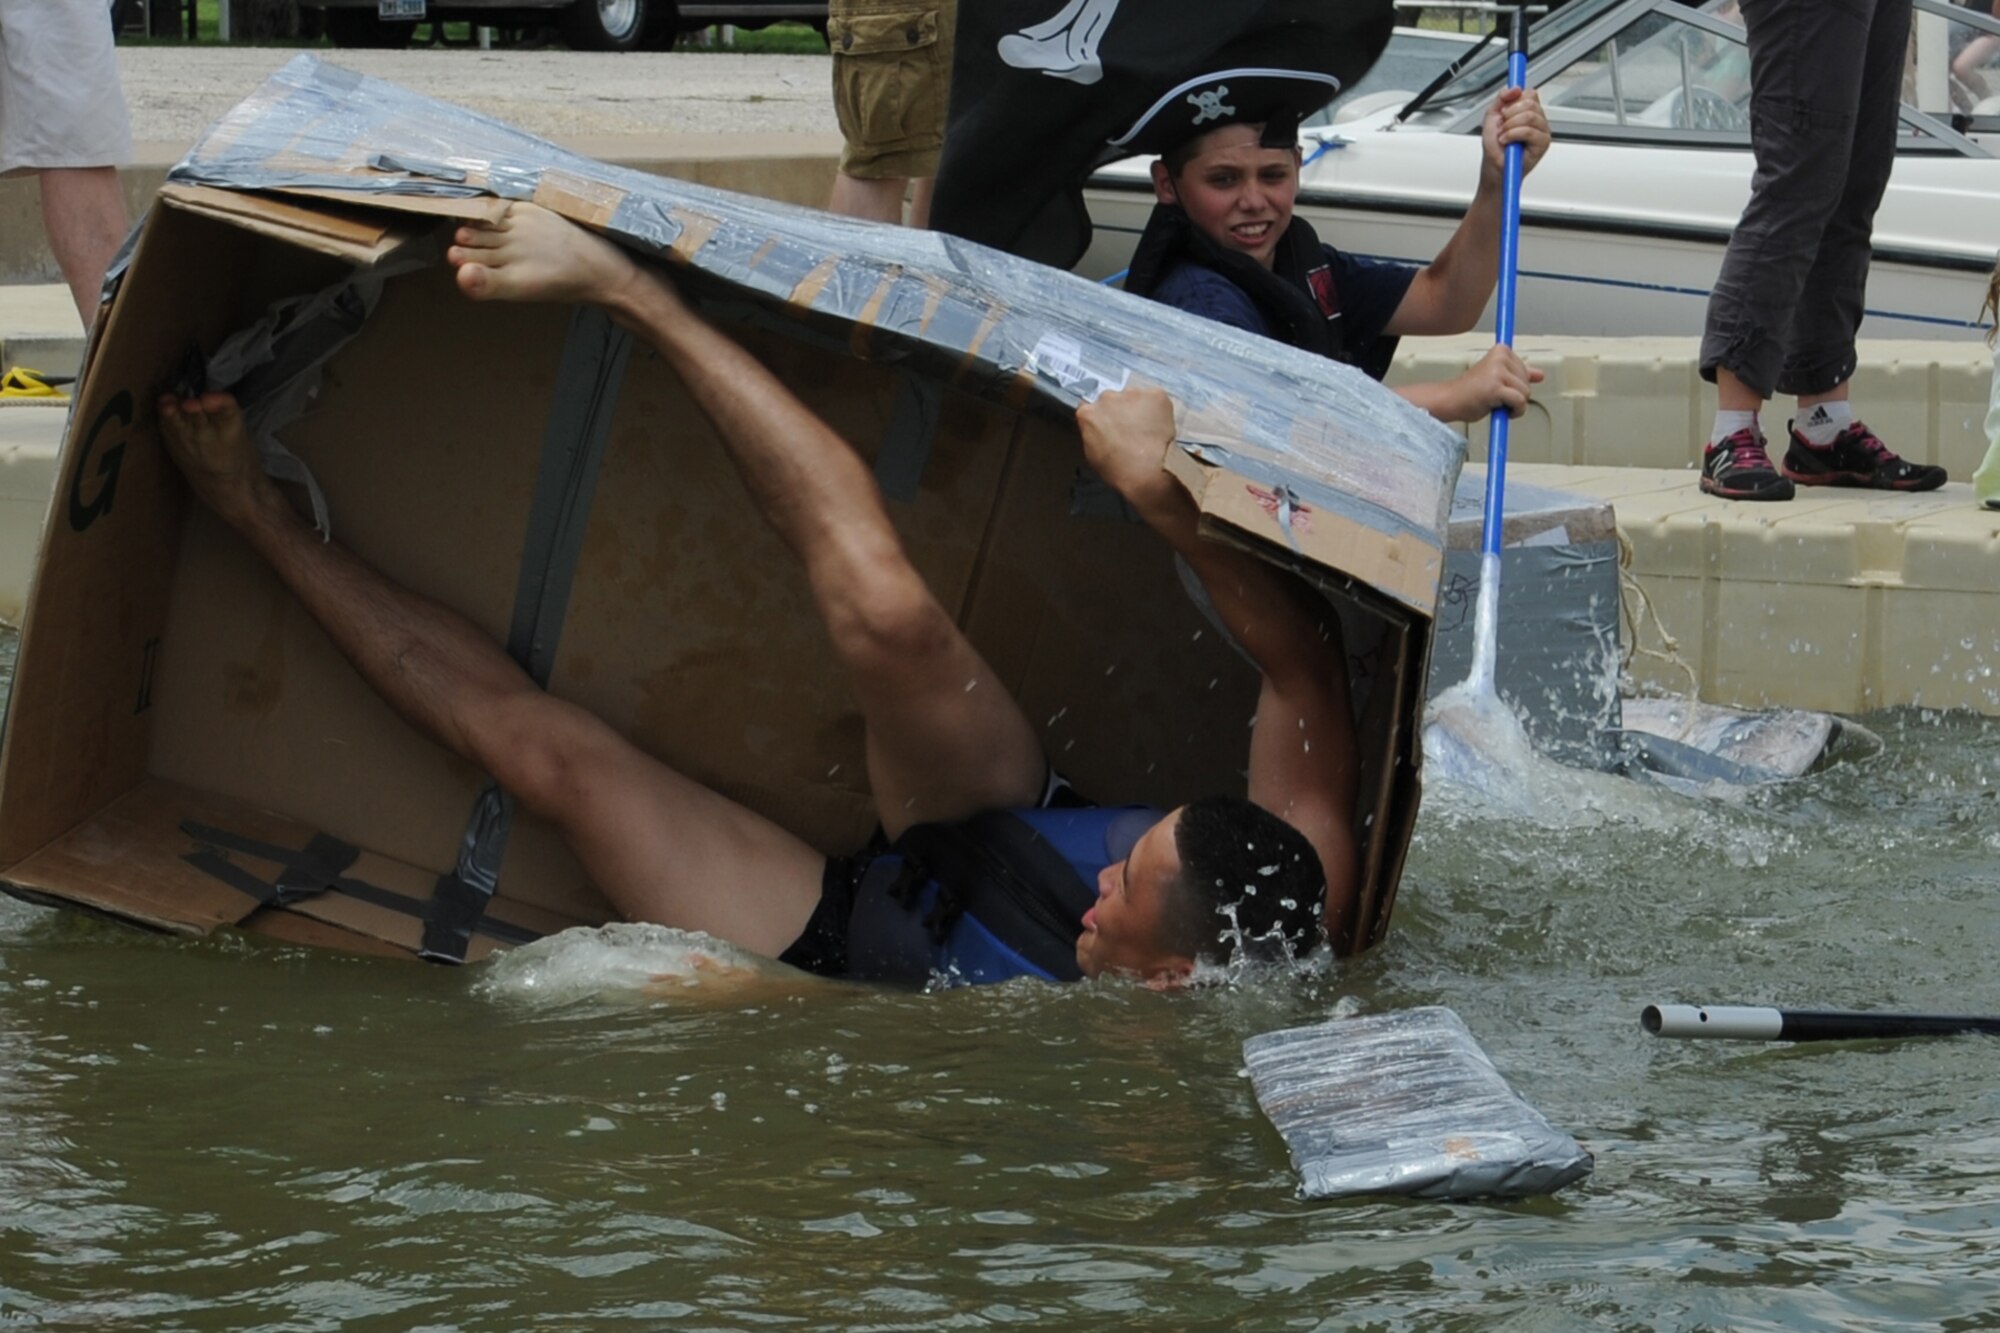 GOODFELLOW AIR FORCE BASE, Texas -- Team Z captain, Airman 1st Class Aziz Sarbashev, 17th Force Support Squadron, capsizes during the Build a Boat contest at the Goodfellow Recreation Camp, May 27. The goal of the competition is to sail a homemade boat out around a distance buoy and back again. (U.S. Air Force photo/ Staff Sgt. Laura R. McFarlane)